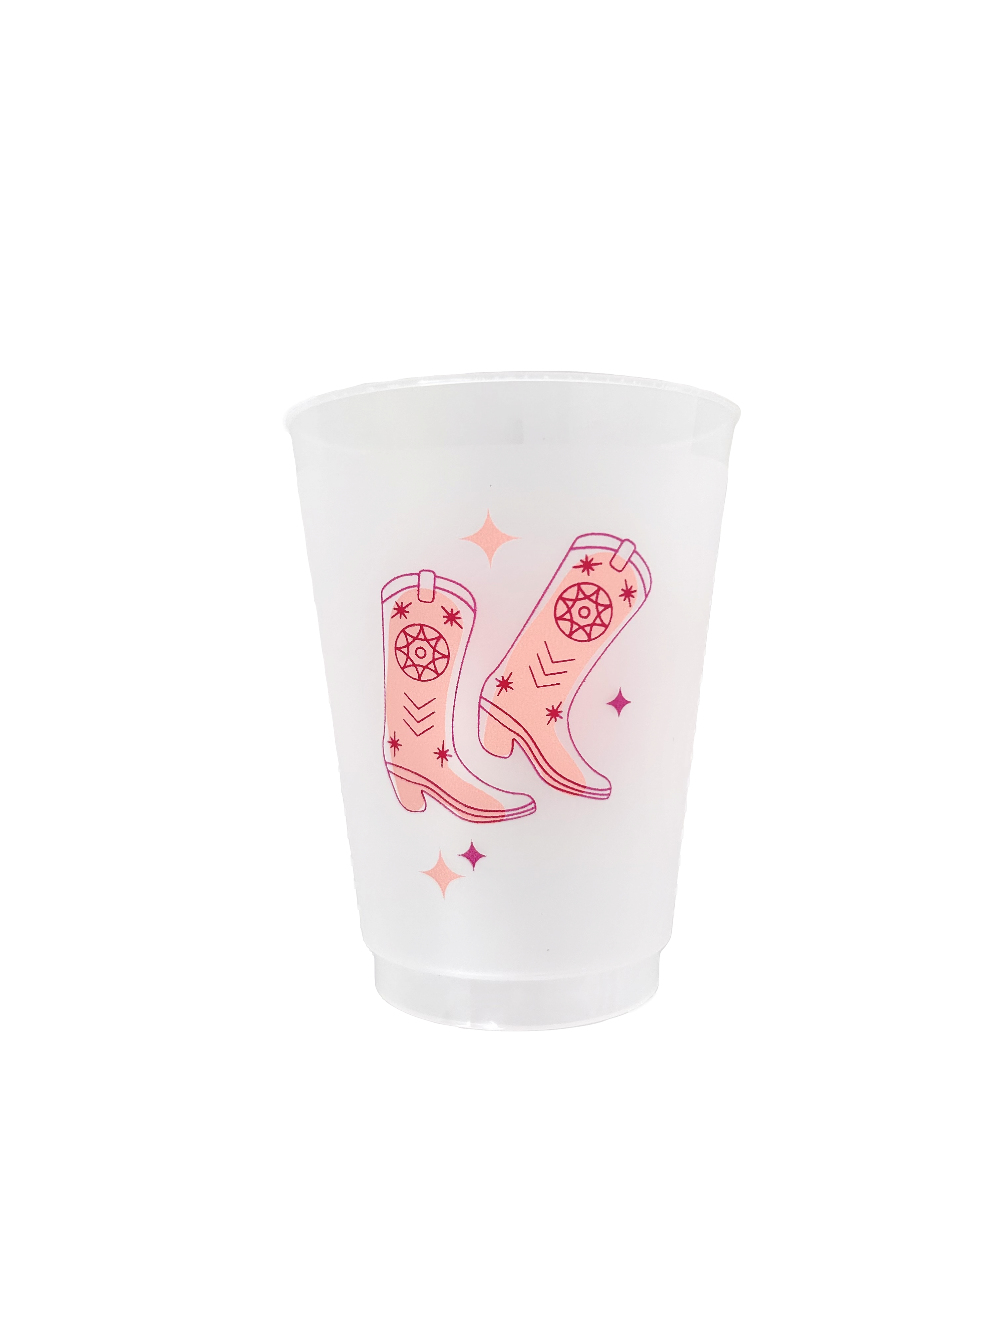 Cowgirl Country Boots Shatterproof Cups, Set of 8